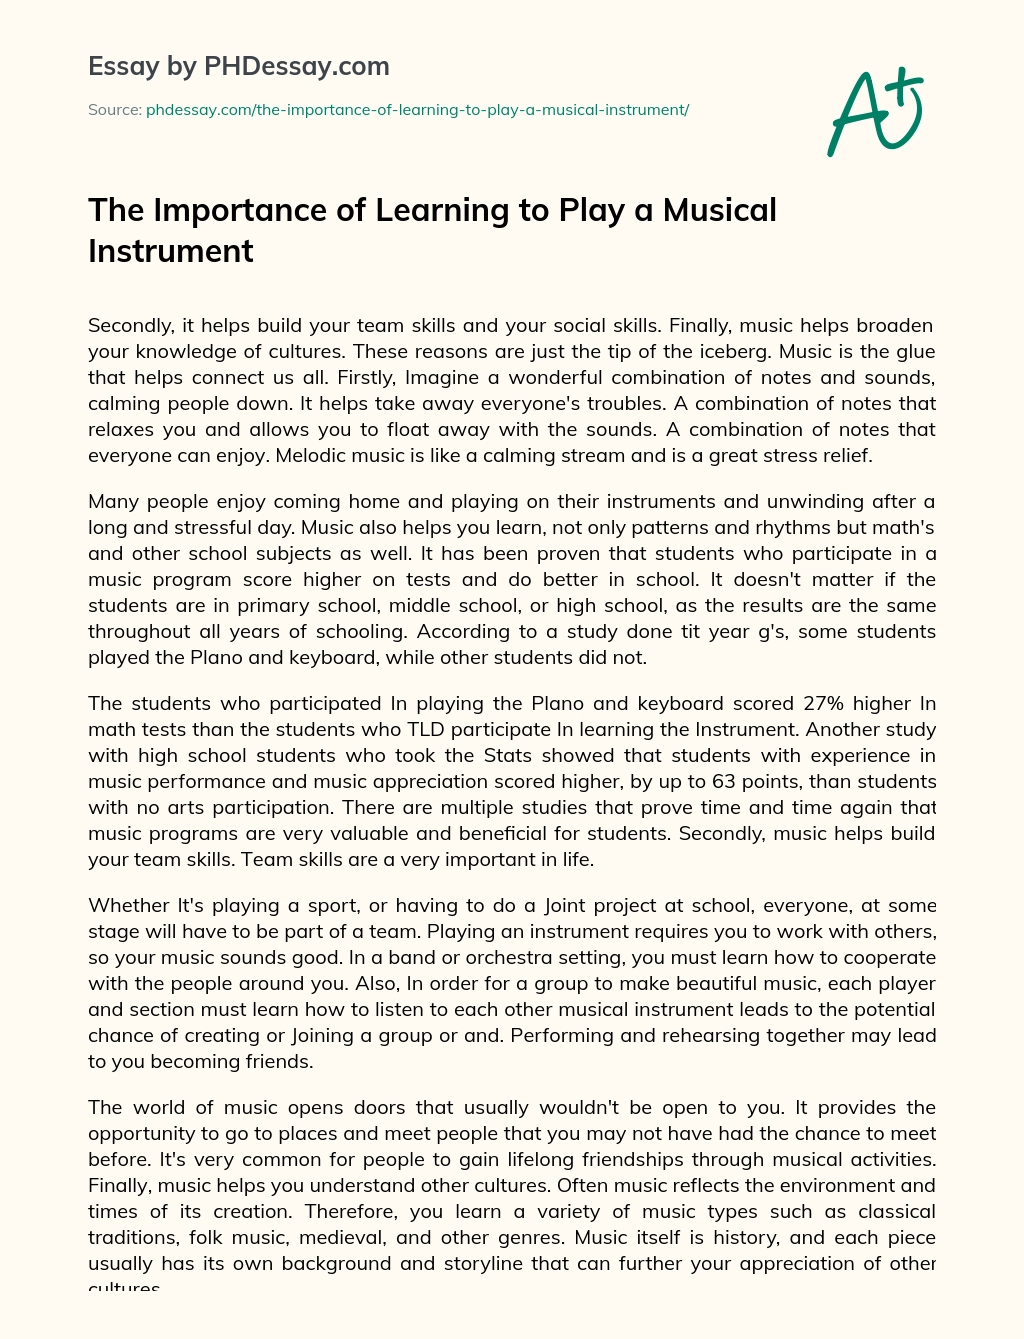 The Importance of Learning to Play a Musical Instrument essay